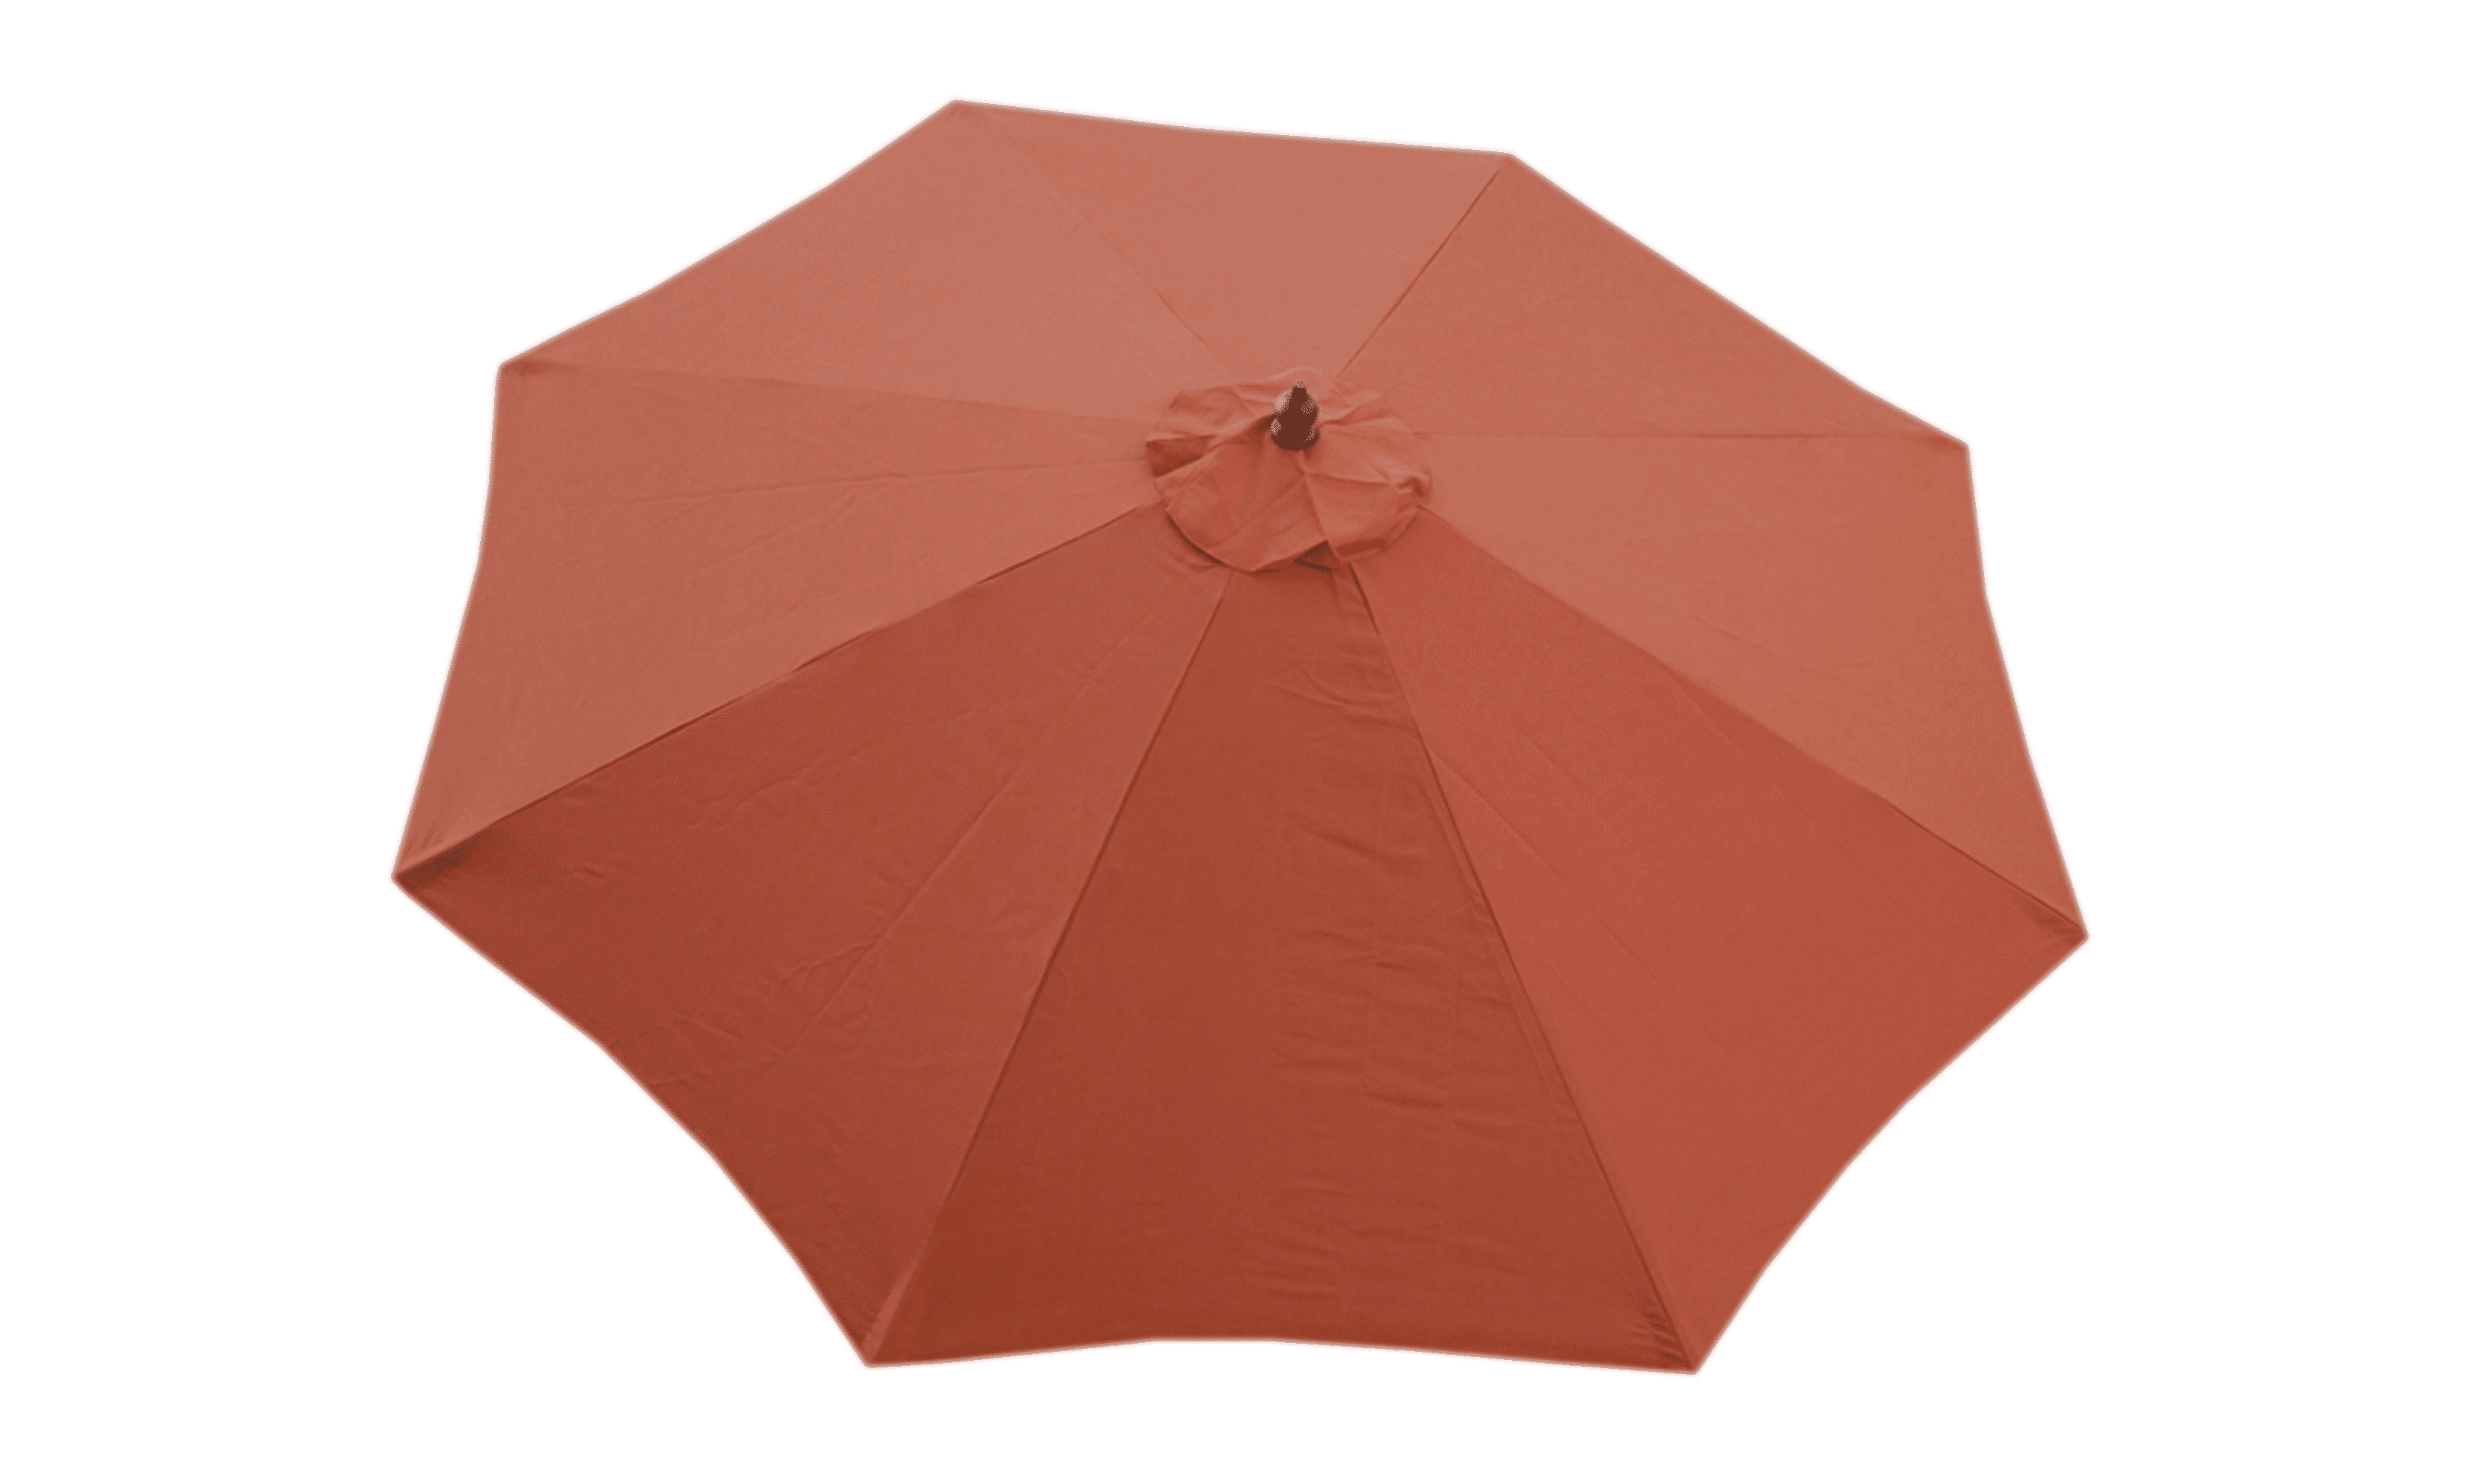 Covered Living 10ft Market Patio Umbrella Replacement Cover Canopy 8 Ribs Terracotta Color